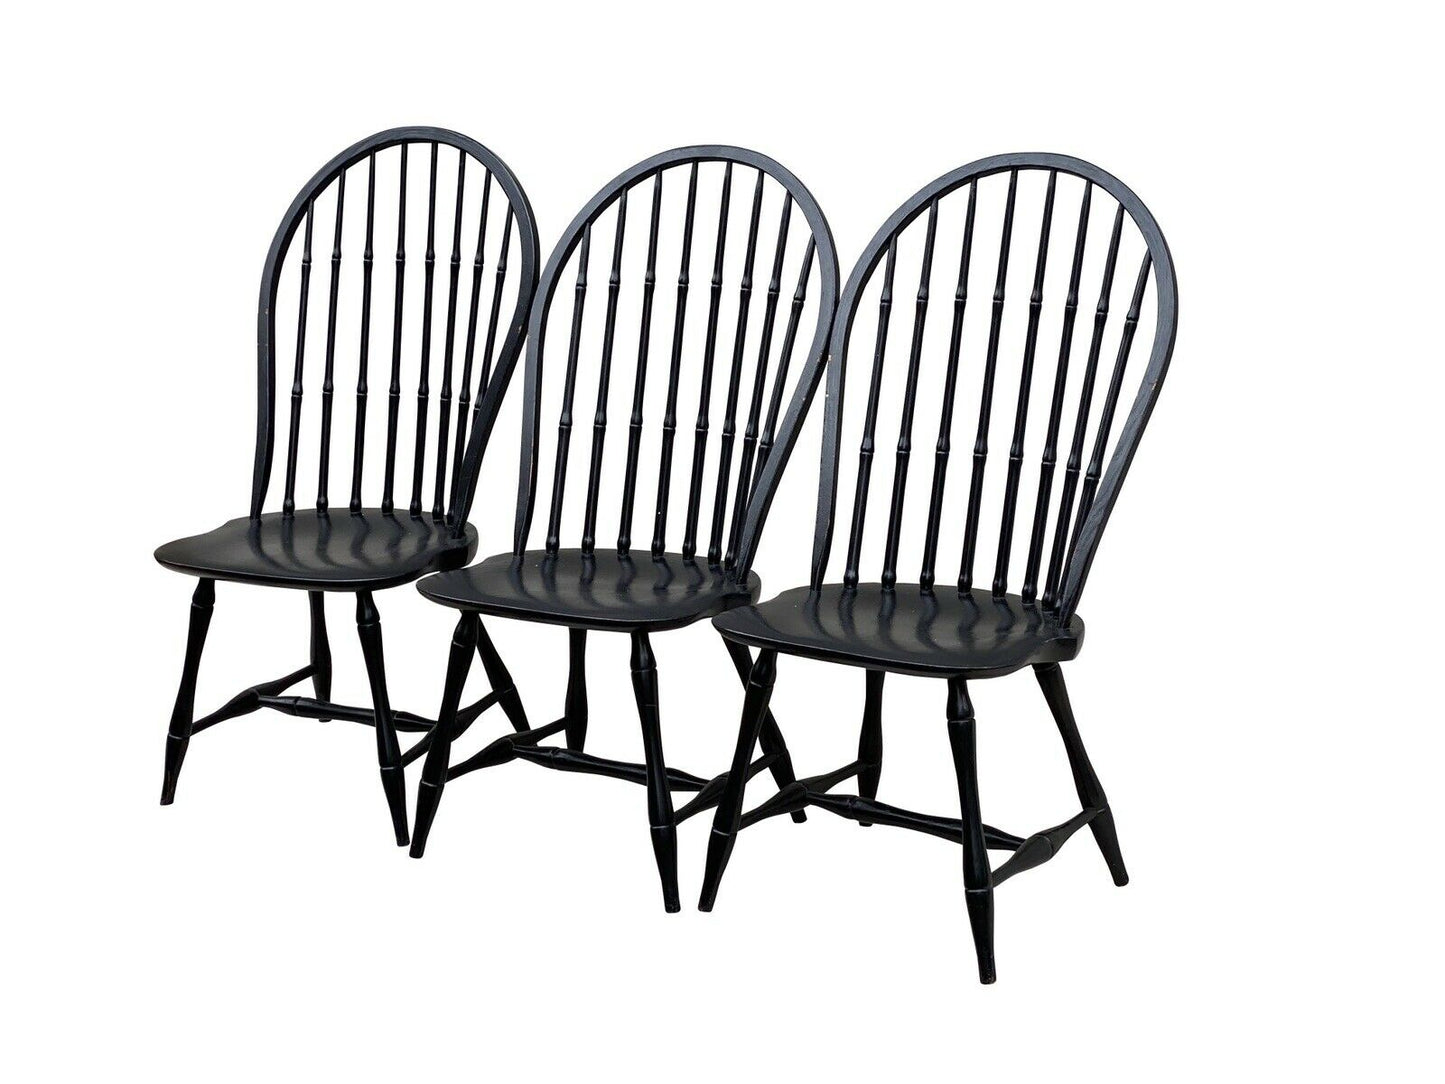 20TH C ANTIQUE STYLE SET OF 5 S BENT BROTHERS HOOP BACK WINDSOR CHAIRS